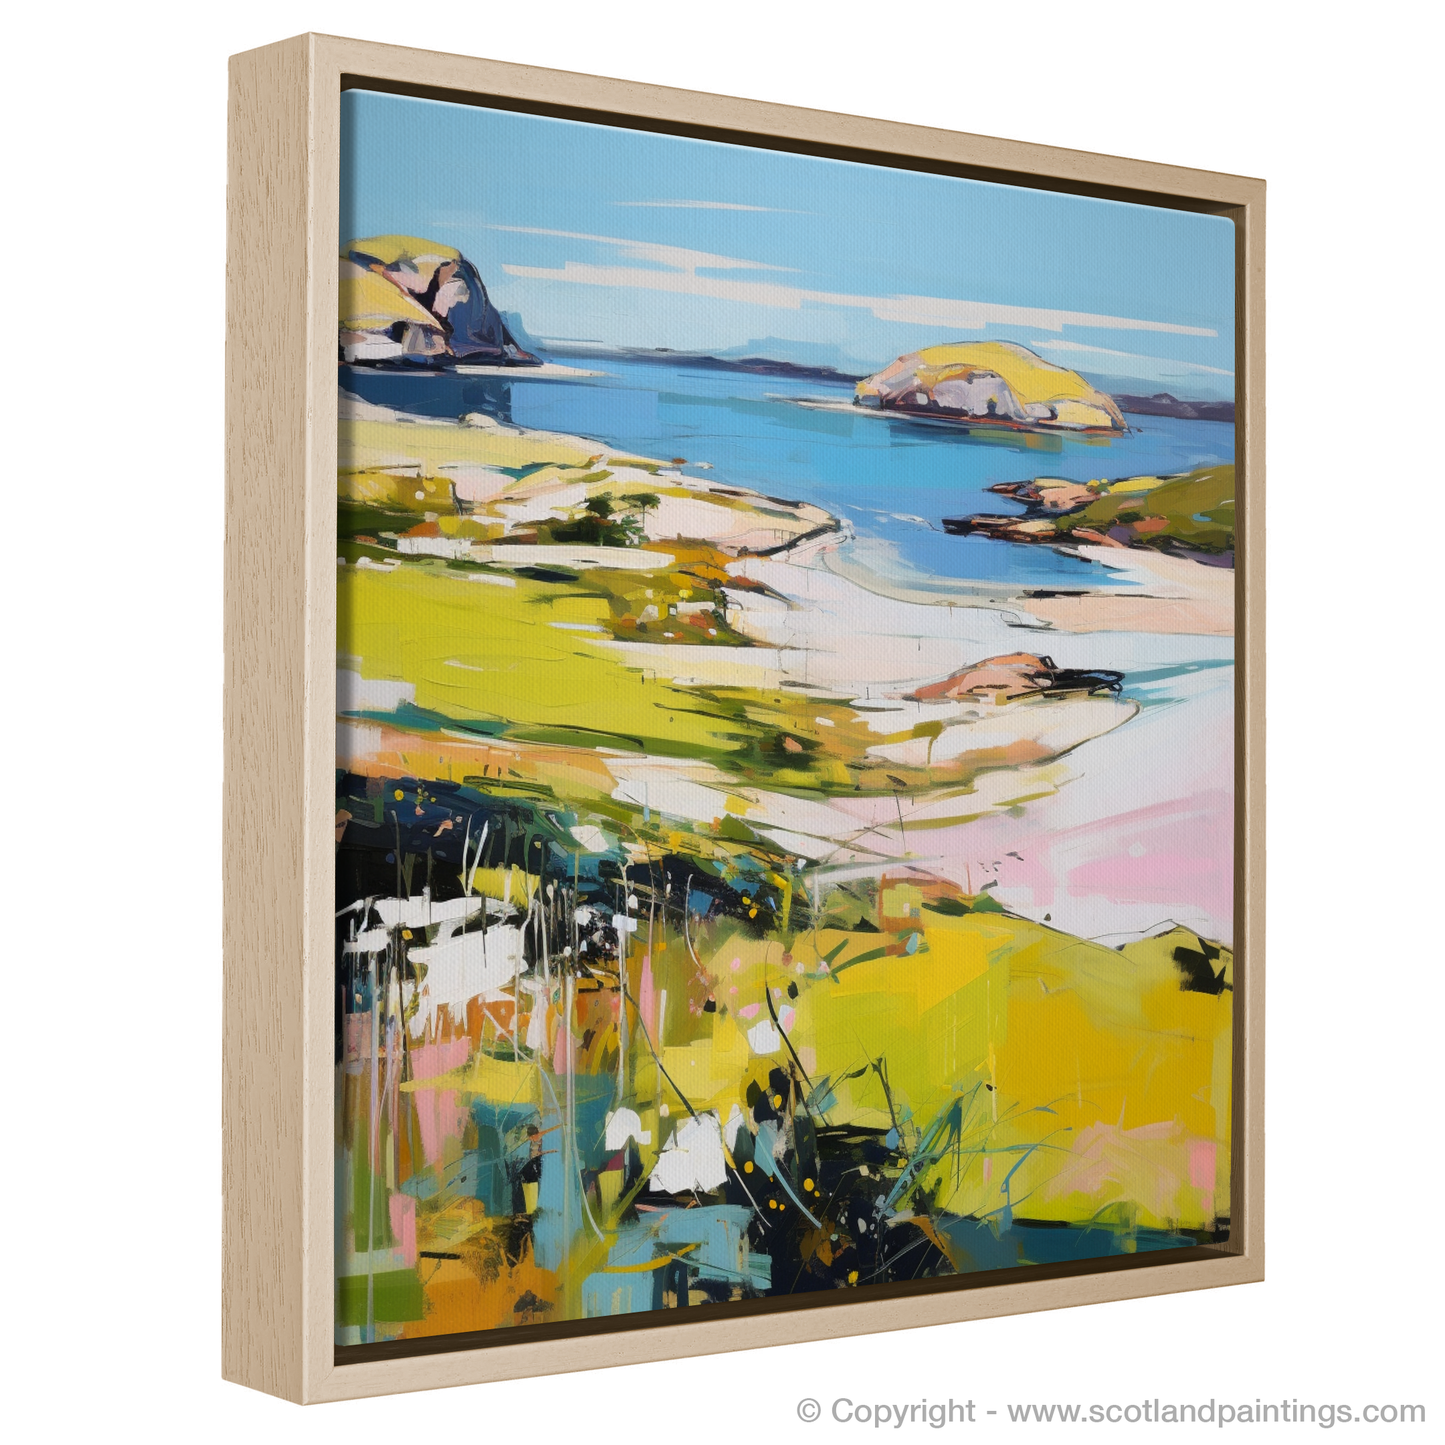 Painting and Art Print of Achmelvich Bay, Sutherland in summer. Achmelvich Bay Summer Symphony.